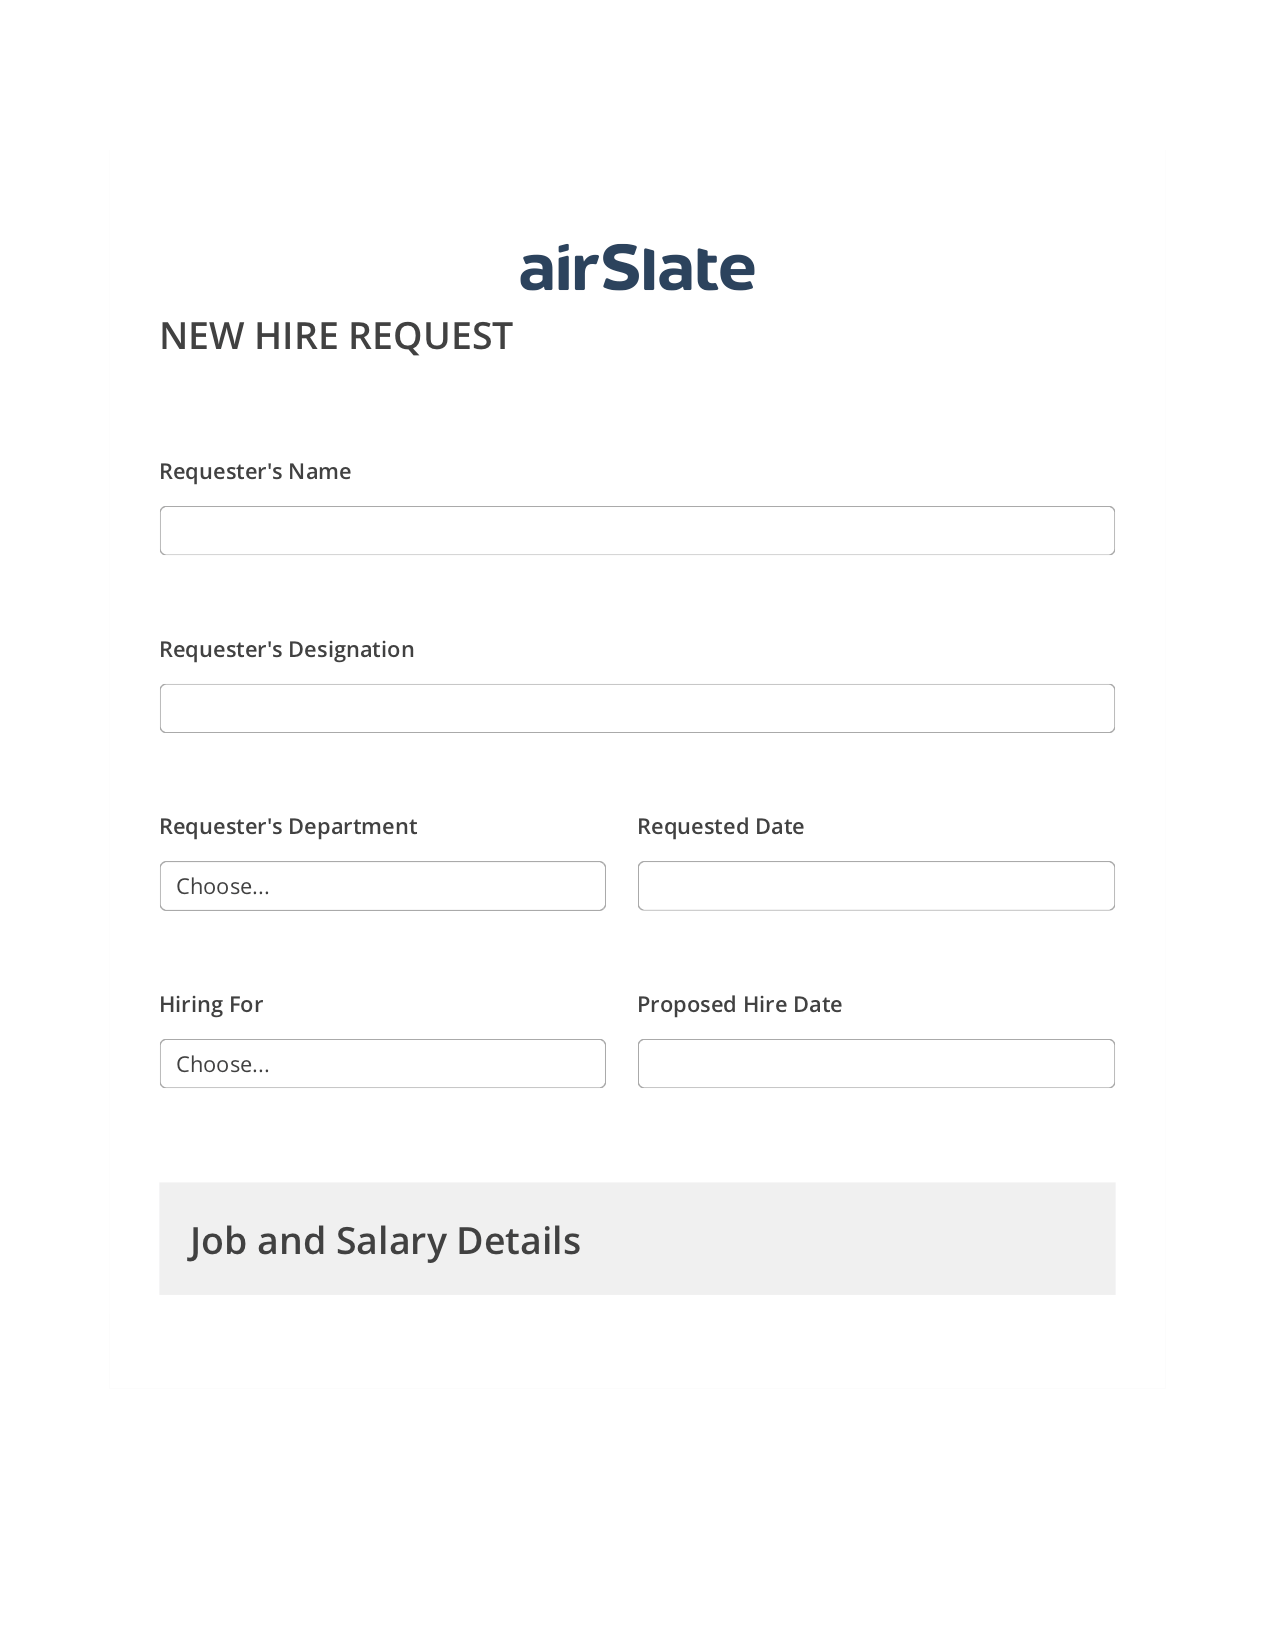 Hiring Request Workflow Pre-fill Document Bot, Send a Slate to MS Dynamics 365 Contact Bot, Export to Smartsheet